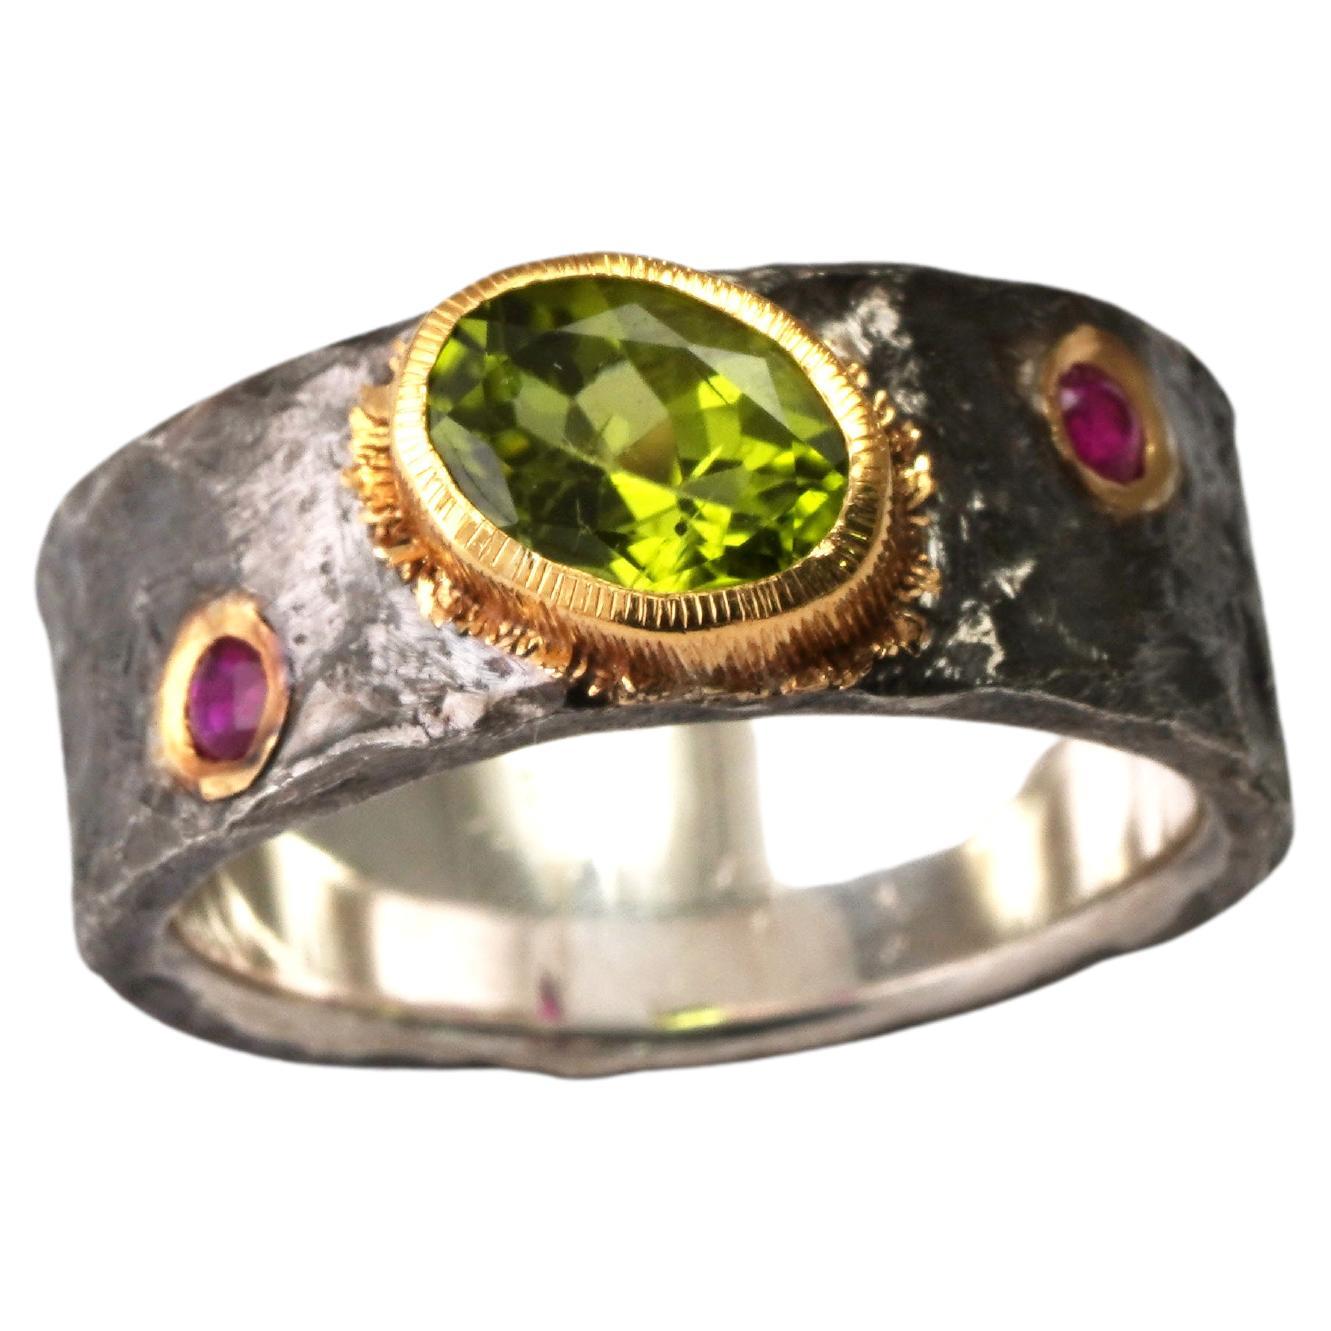 925 Oxidized Silver Ring 22 Karat Yellow Gold Peridot Ruby Ring For Sale